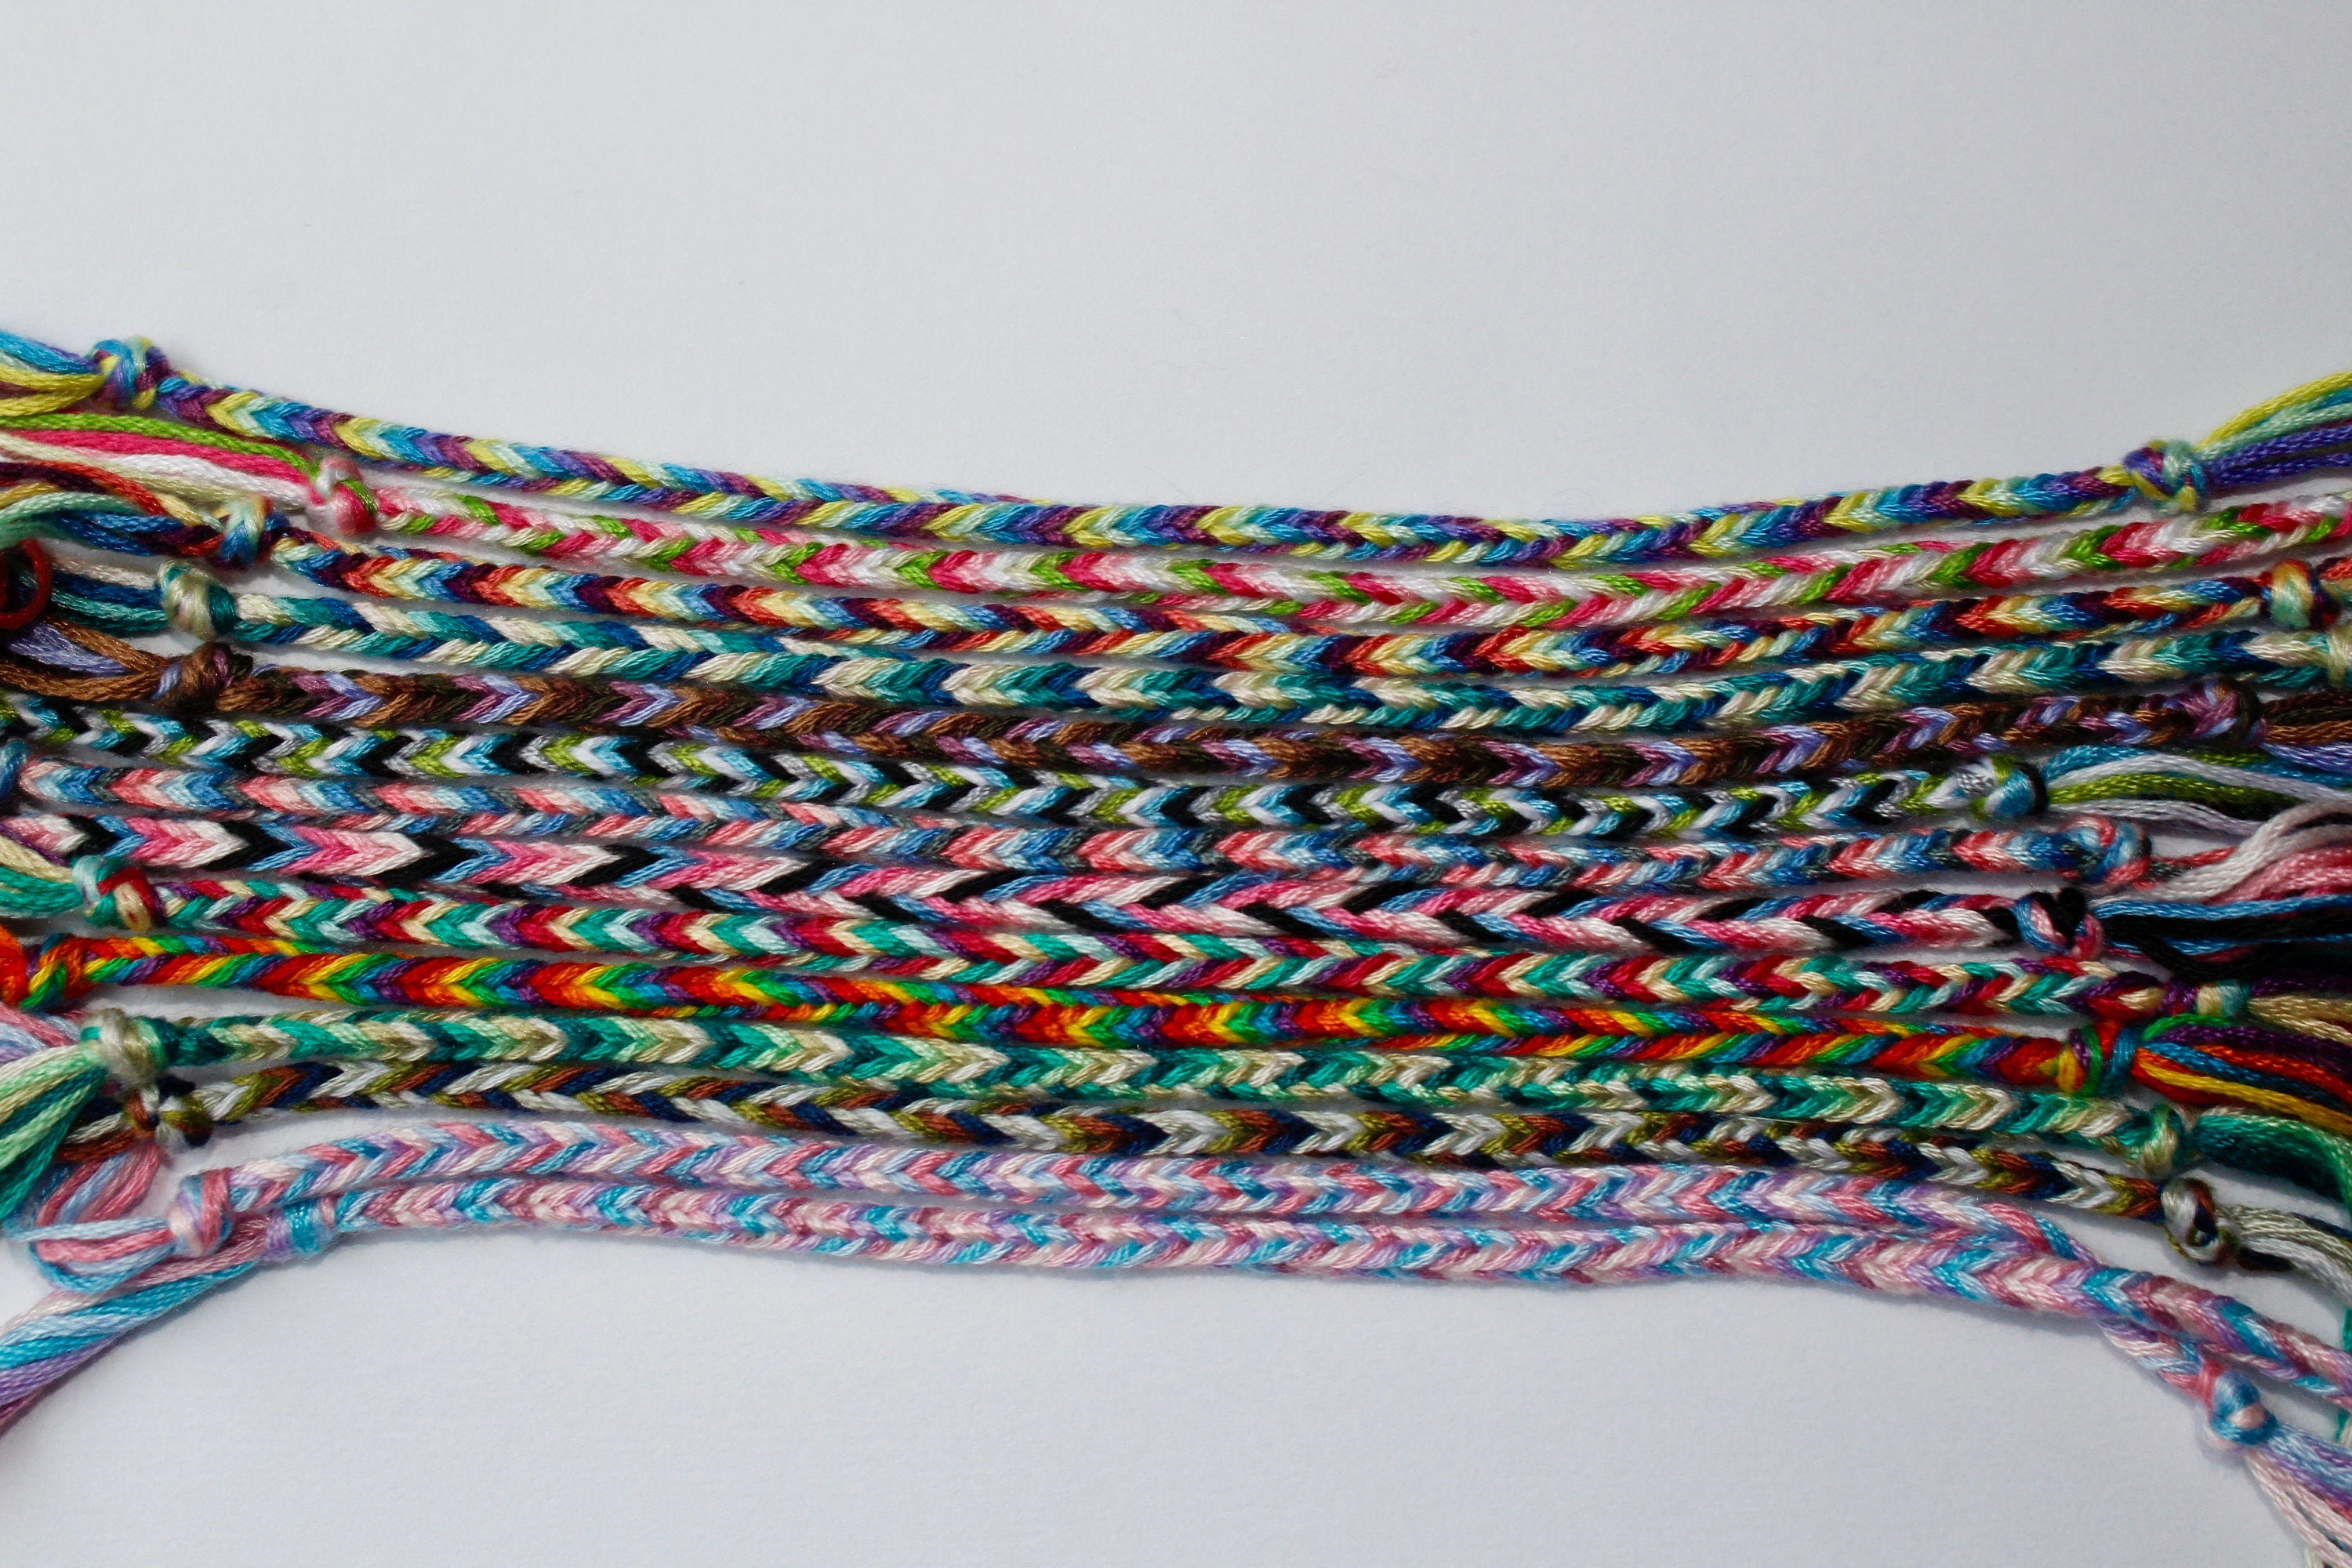 How to Make a Fishtail Loom Bracelet: 11 Steps (with Pictures)